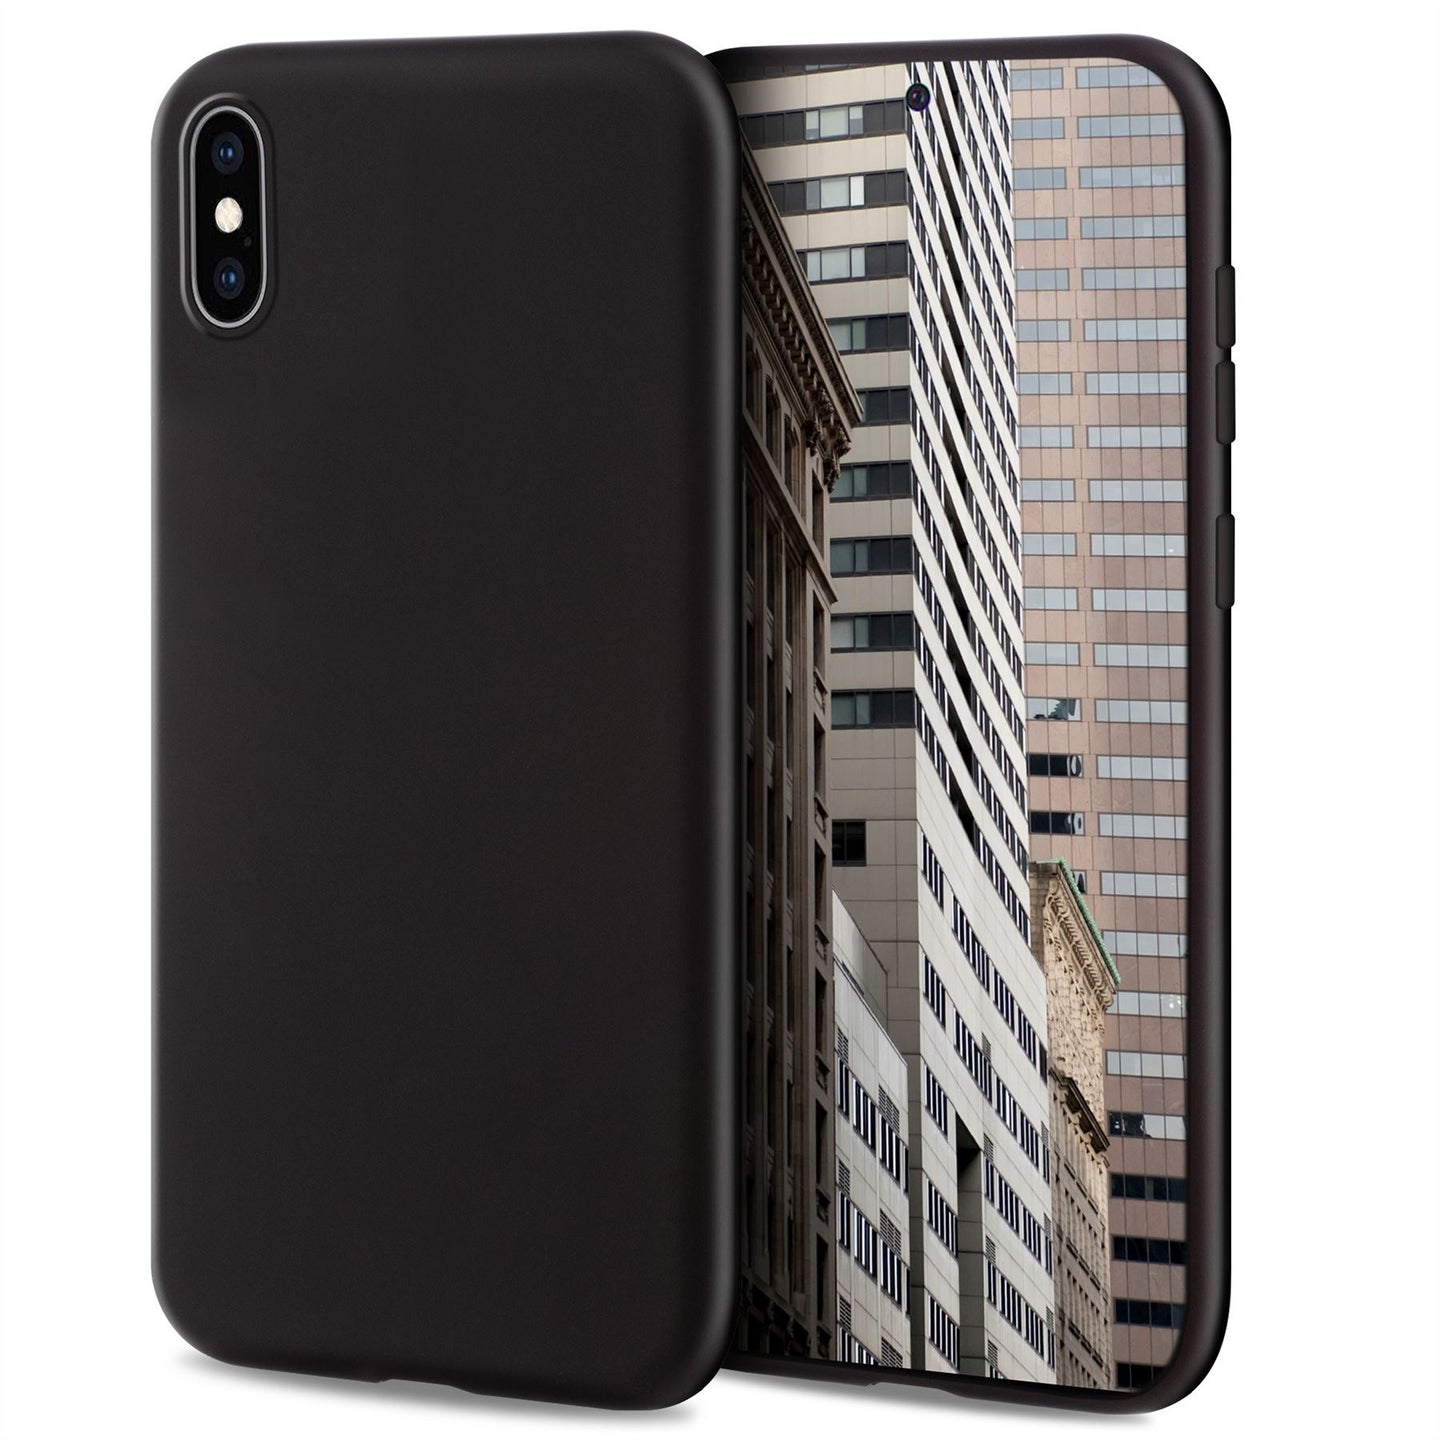 Moozy Lifestyle. Designed for iPhone X and iPhone XS Case, Black - Liquid Silicone Cover with Matte Finish and Soft Microfiber Lining